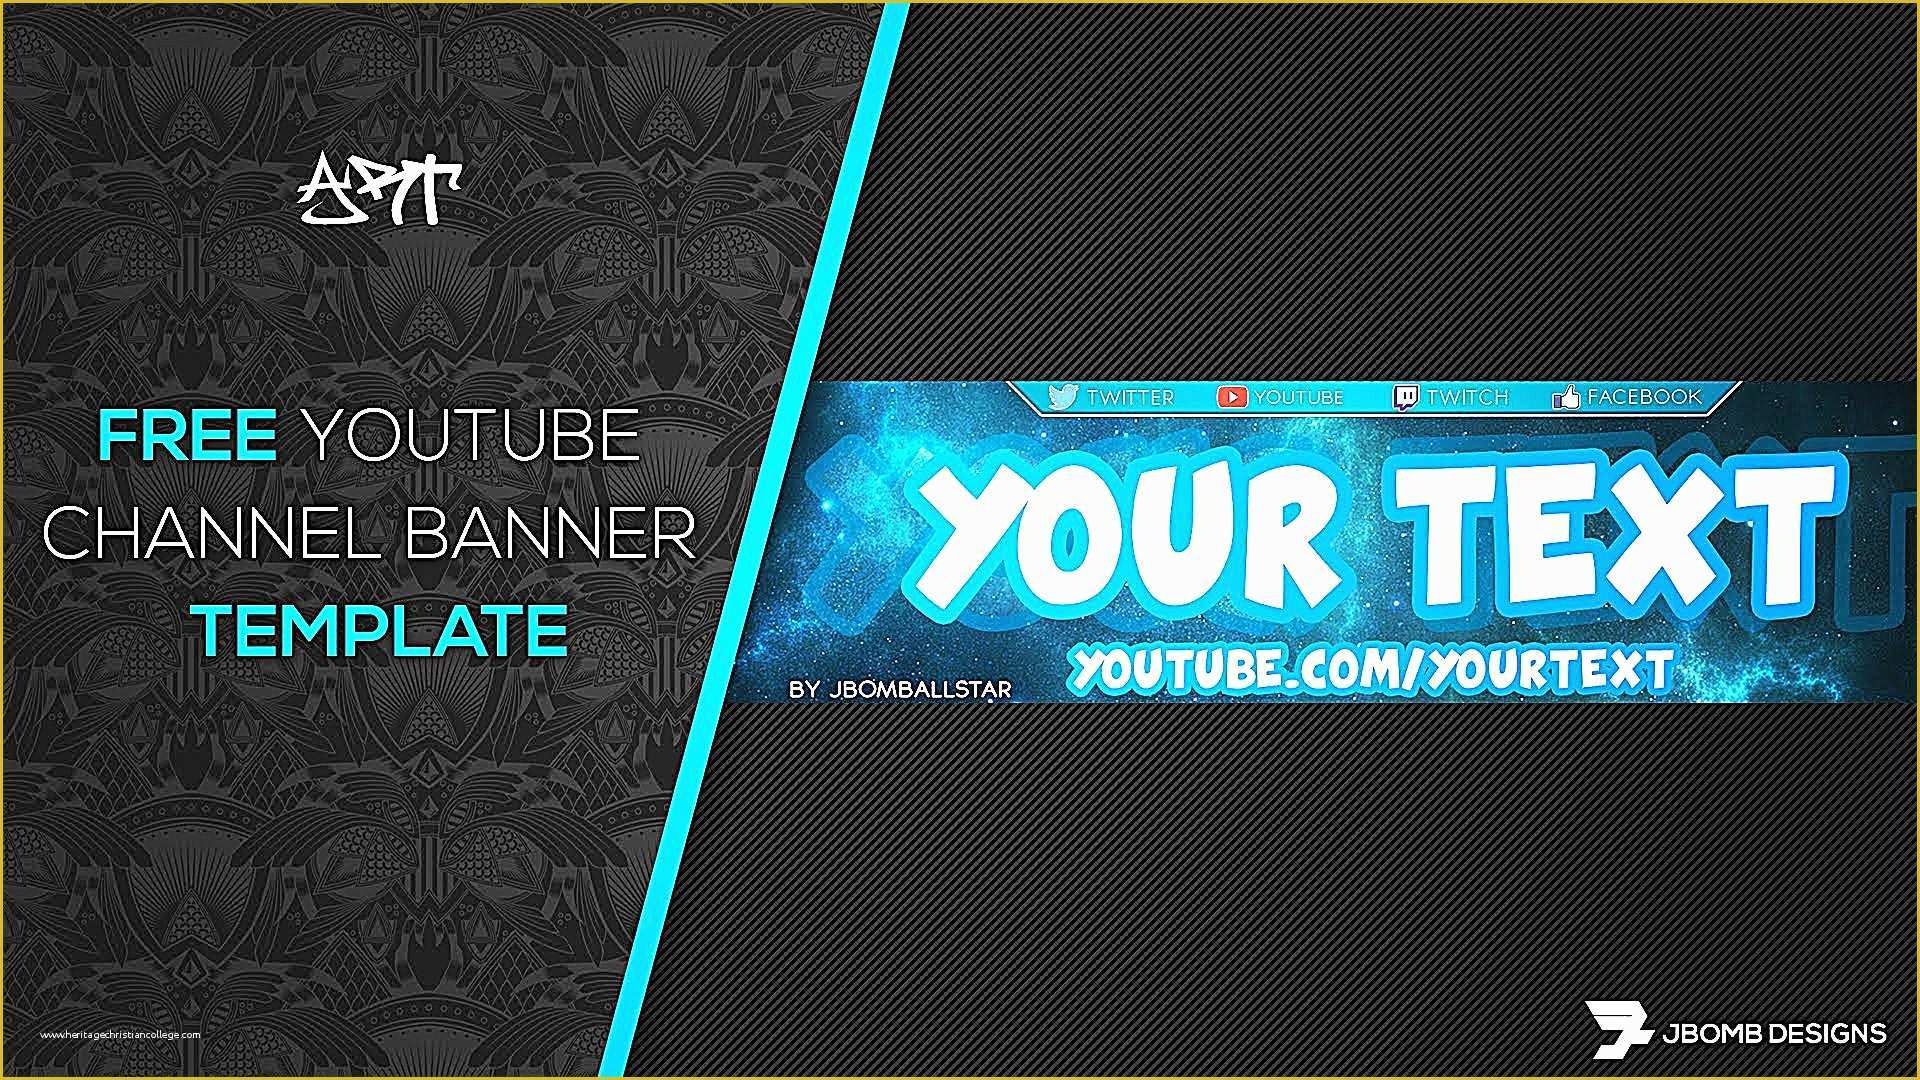 Free Youtube Template Creator Of Youtube Channel Art Template Maker Awesome 11 Best Covers